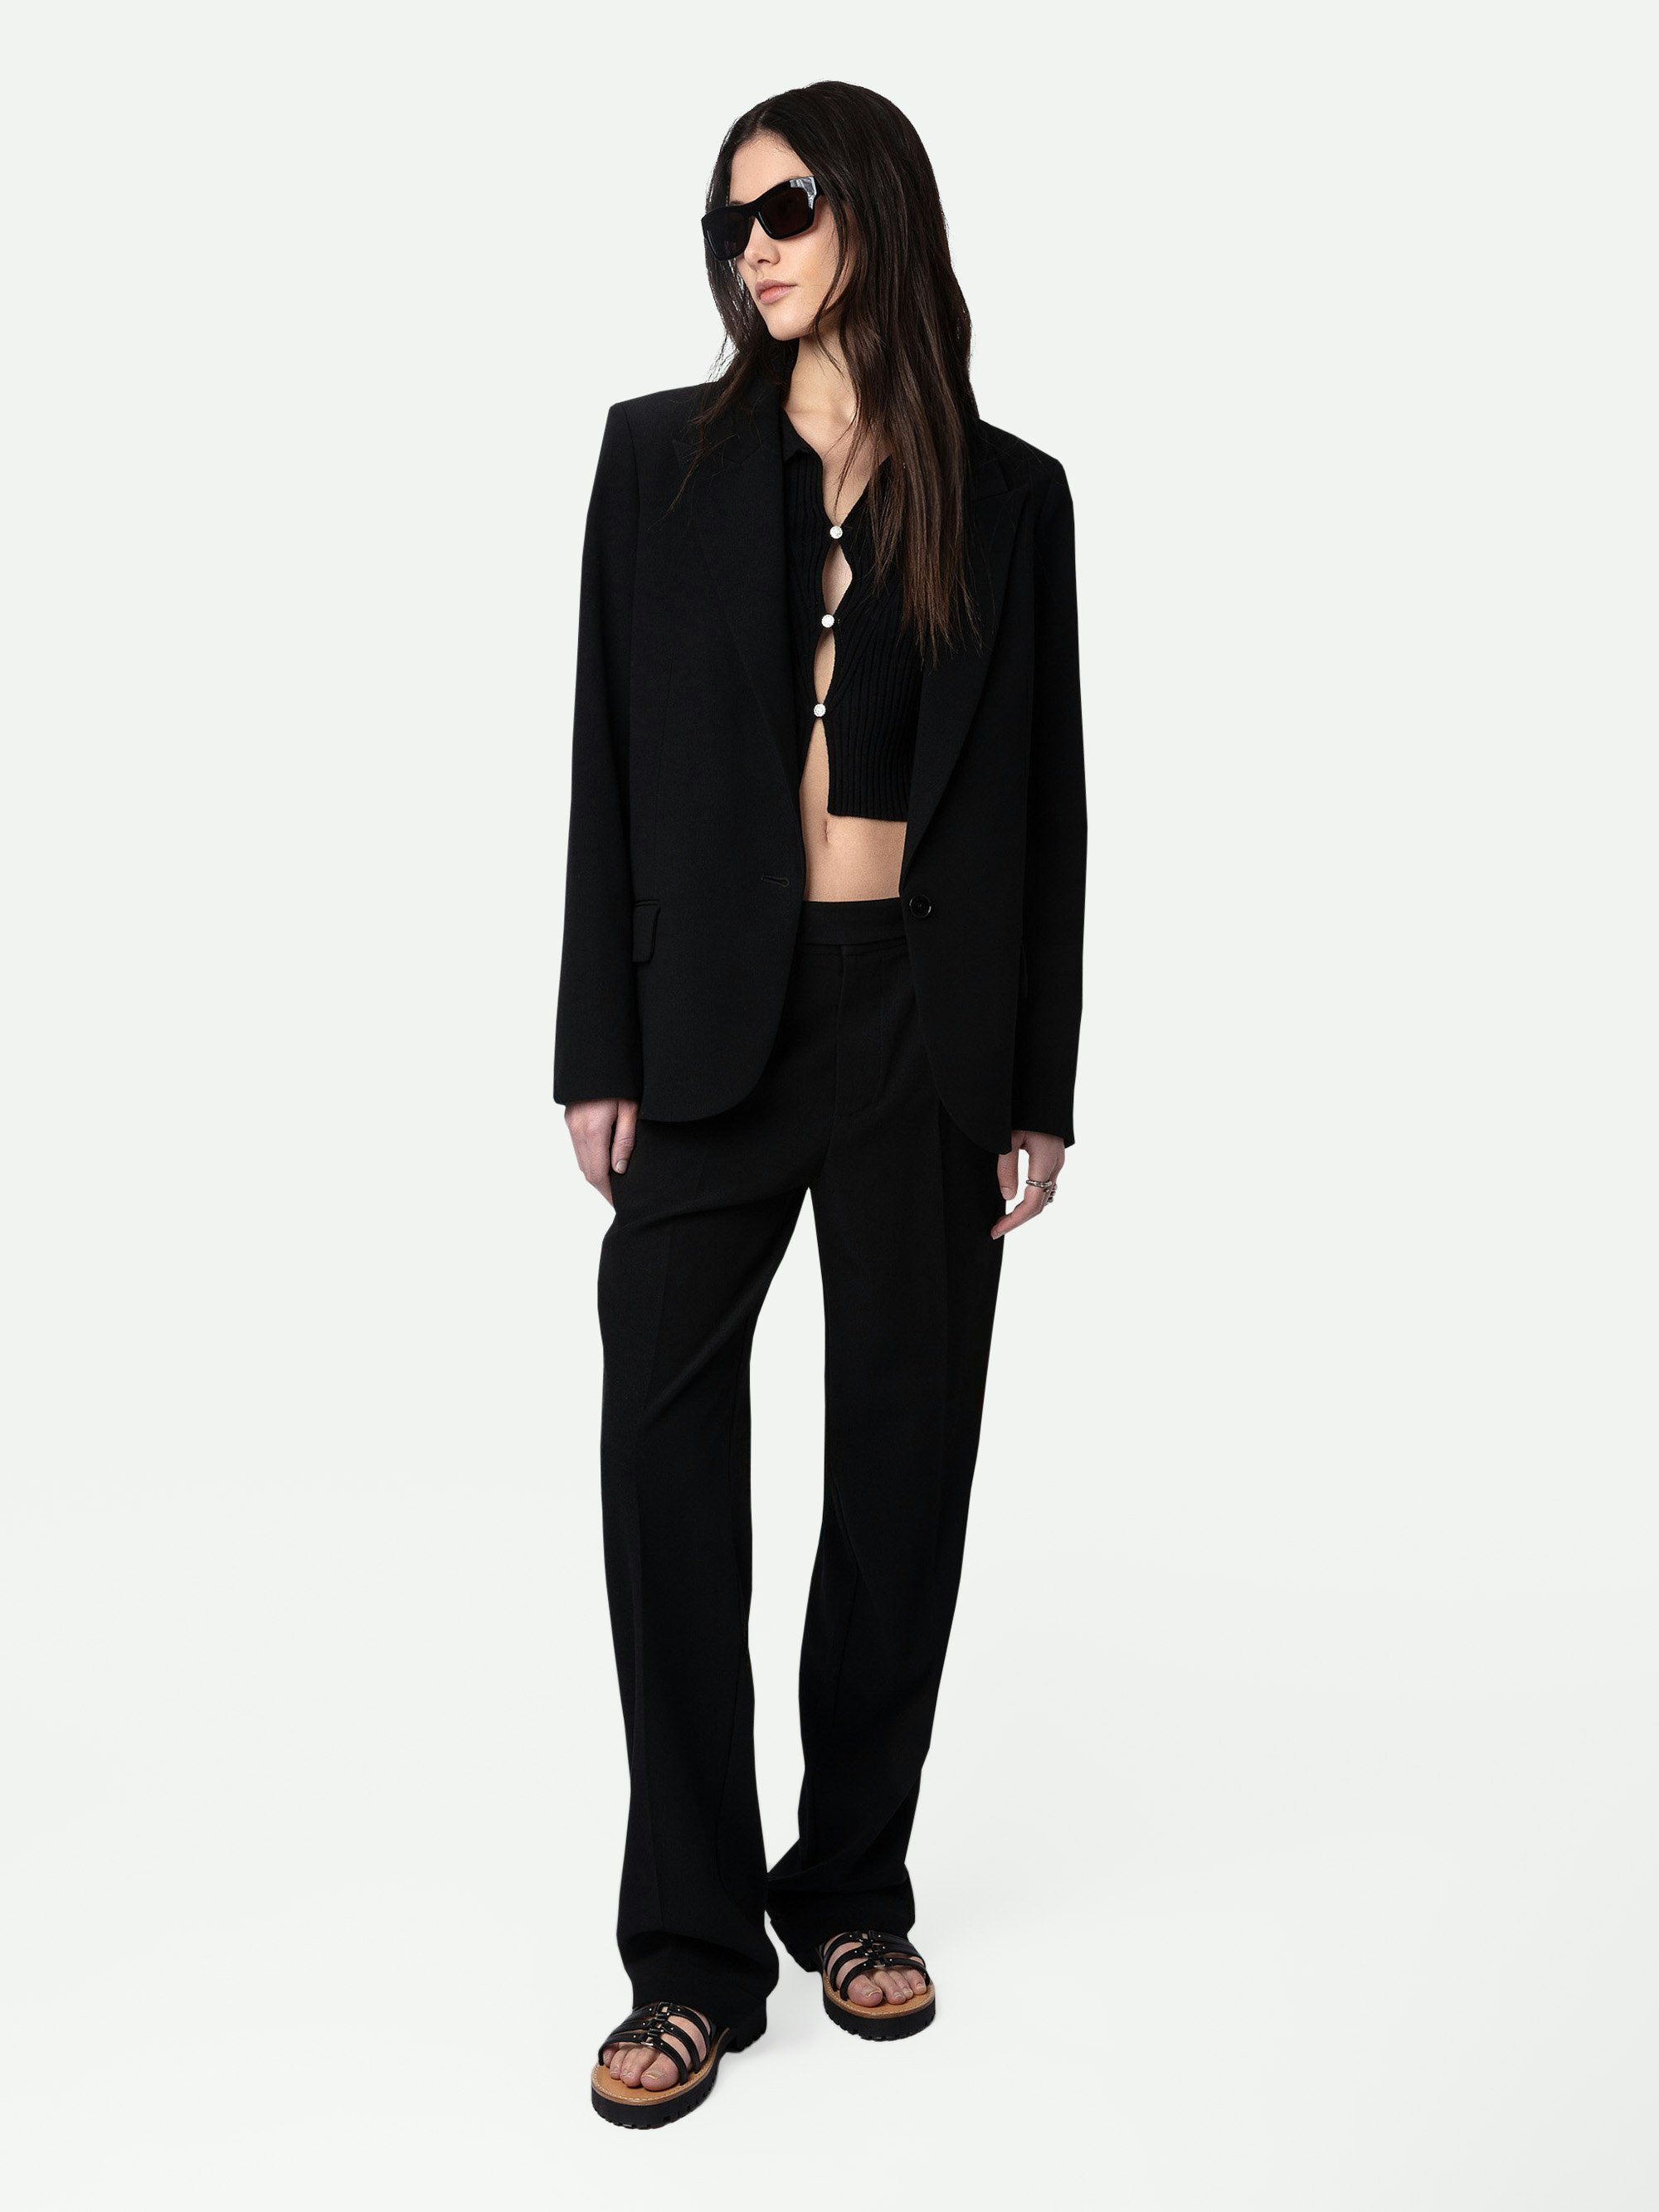 Pura Trousers - Black crêpe tailored trousers with pockets and hems.